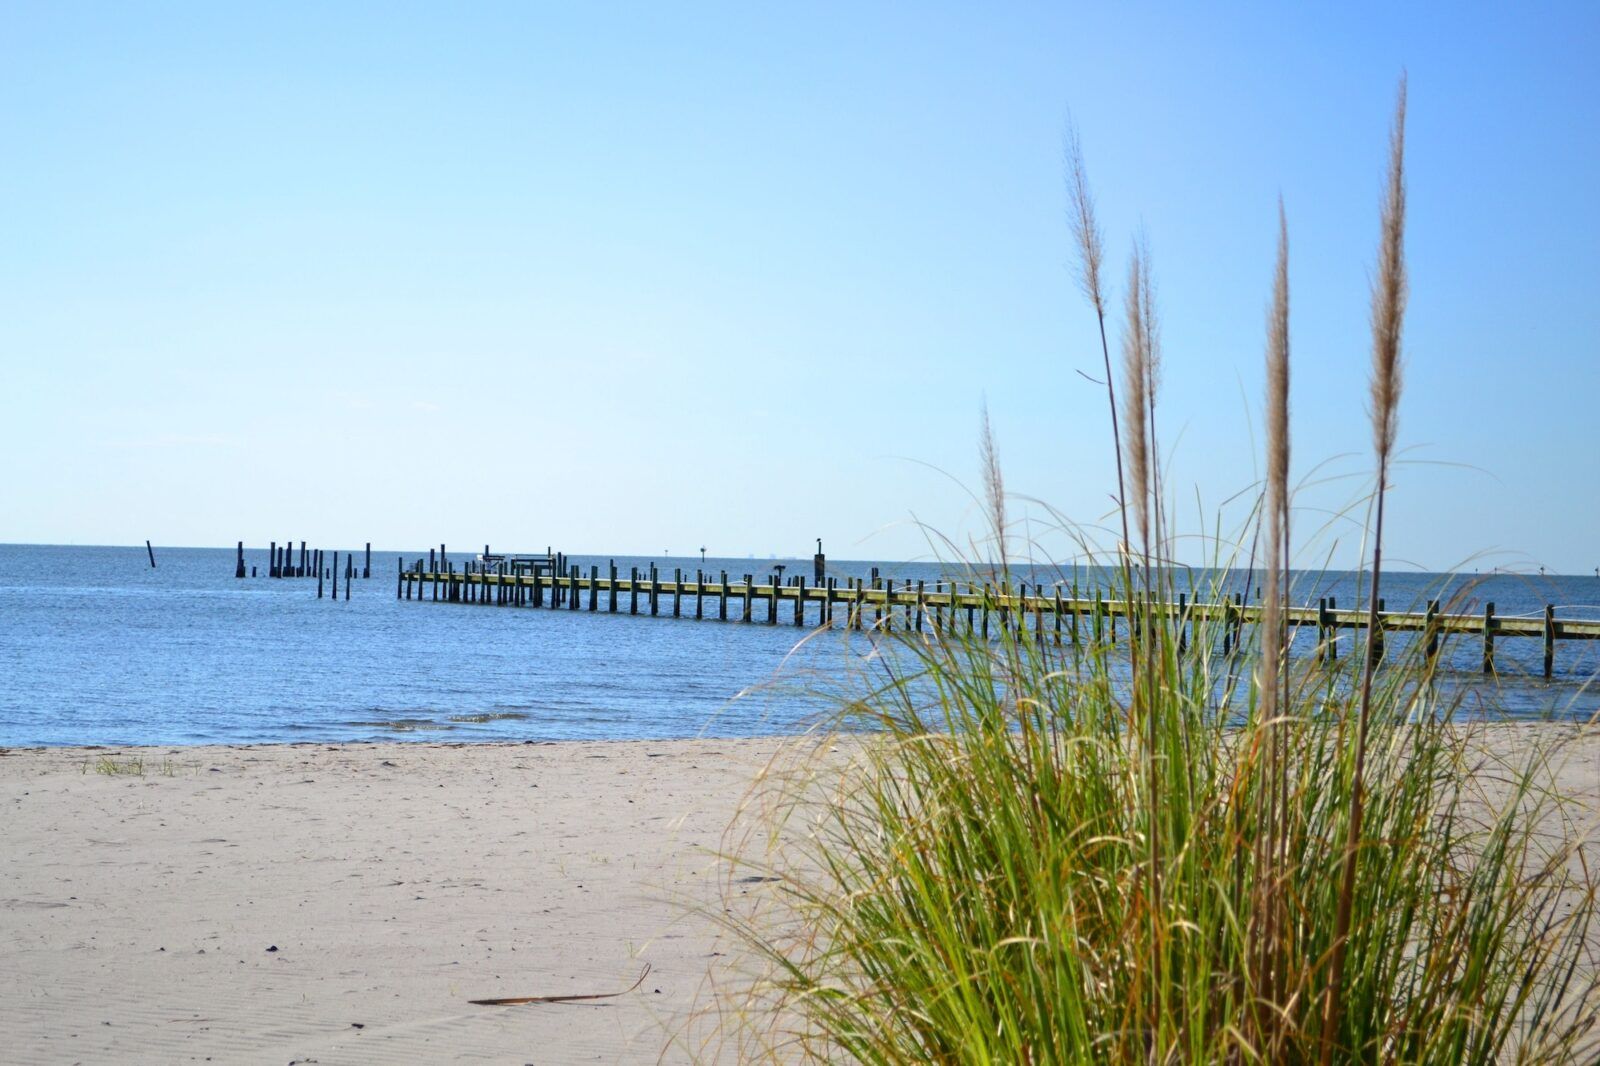 Sea grass in sand with the Chesapeake Bay and pier dock in the background